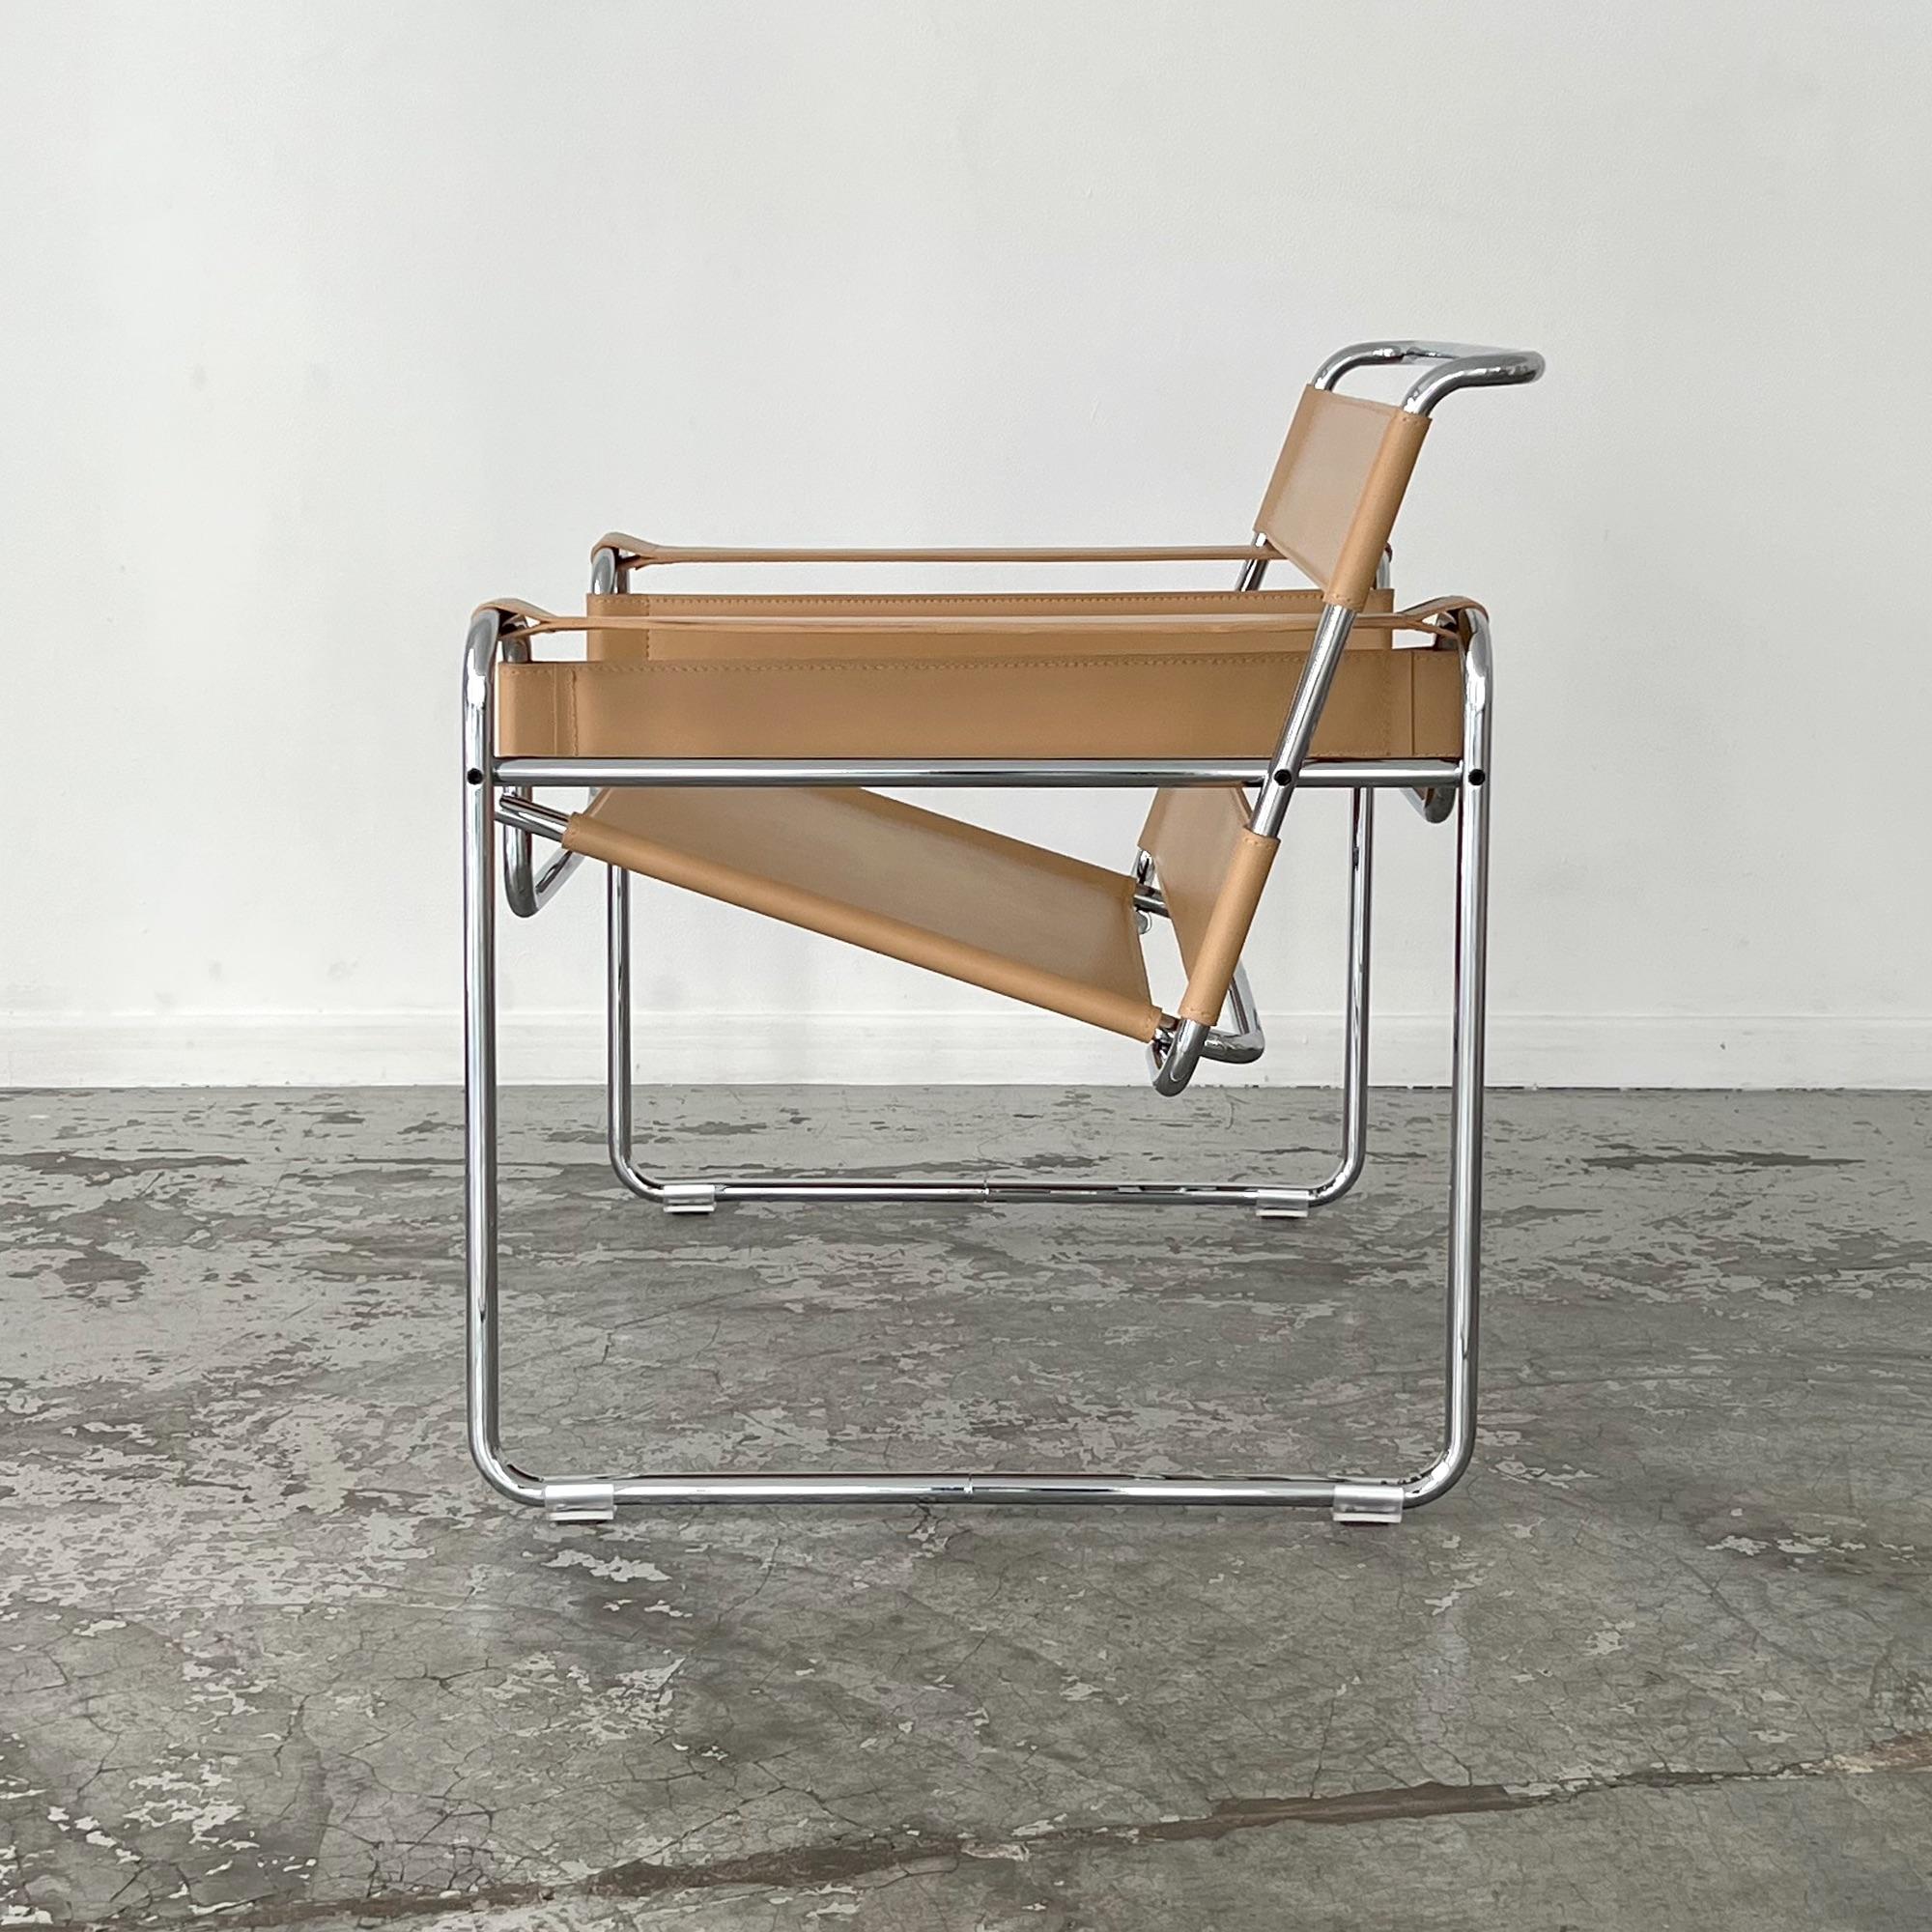 This iconic model was designed by Marcel Breuer in 1925, during his period as director of the Bauhaus carpentry workshop in Dessau, Germany. He drew his inspiration from his Adler bicycle, fascinated by its design and the lightness of its tubular